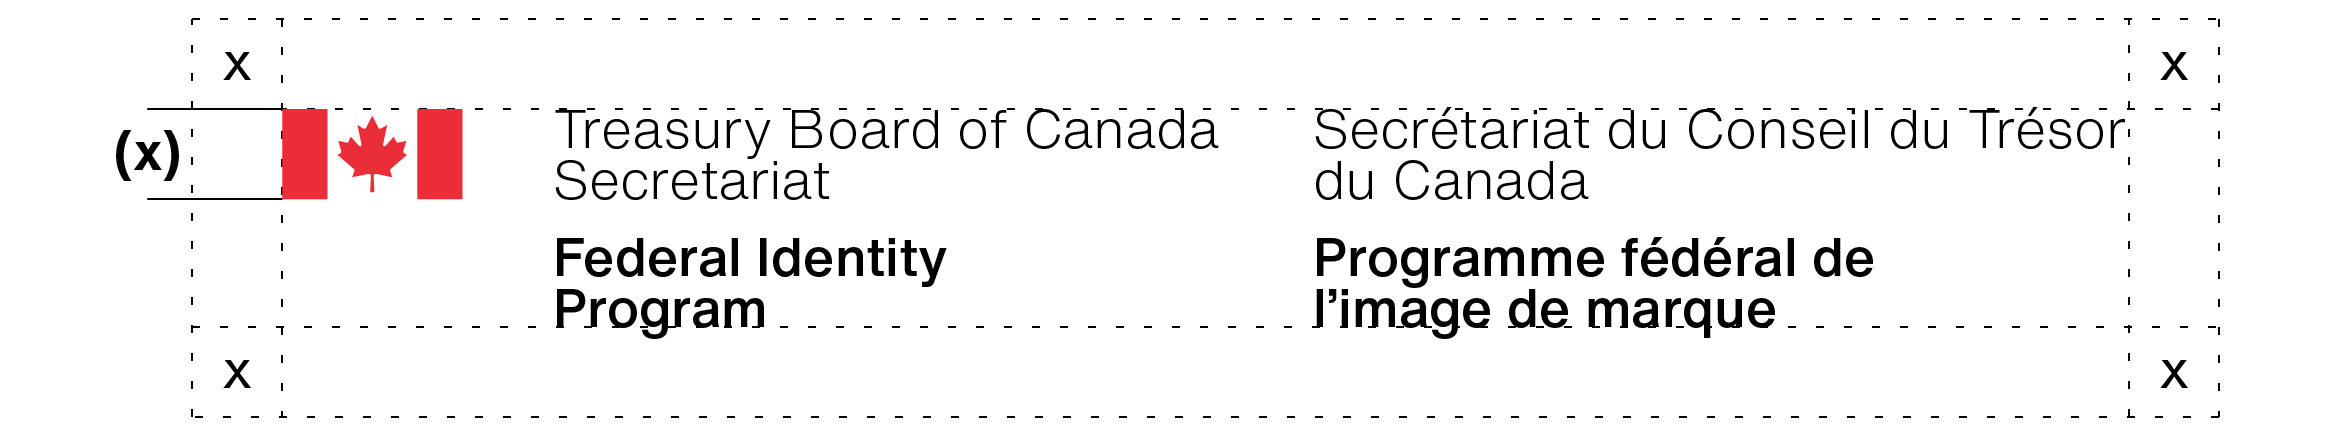 Flag signature for the Treasury Board of Canada Secretariat with the Federal Identity Program service title. The clear space required around a flag signature is explained in the text above.